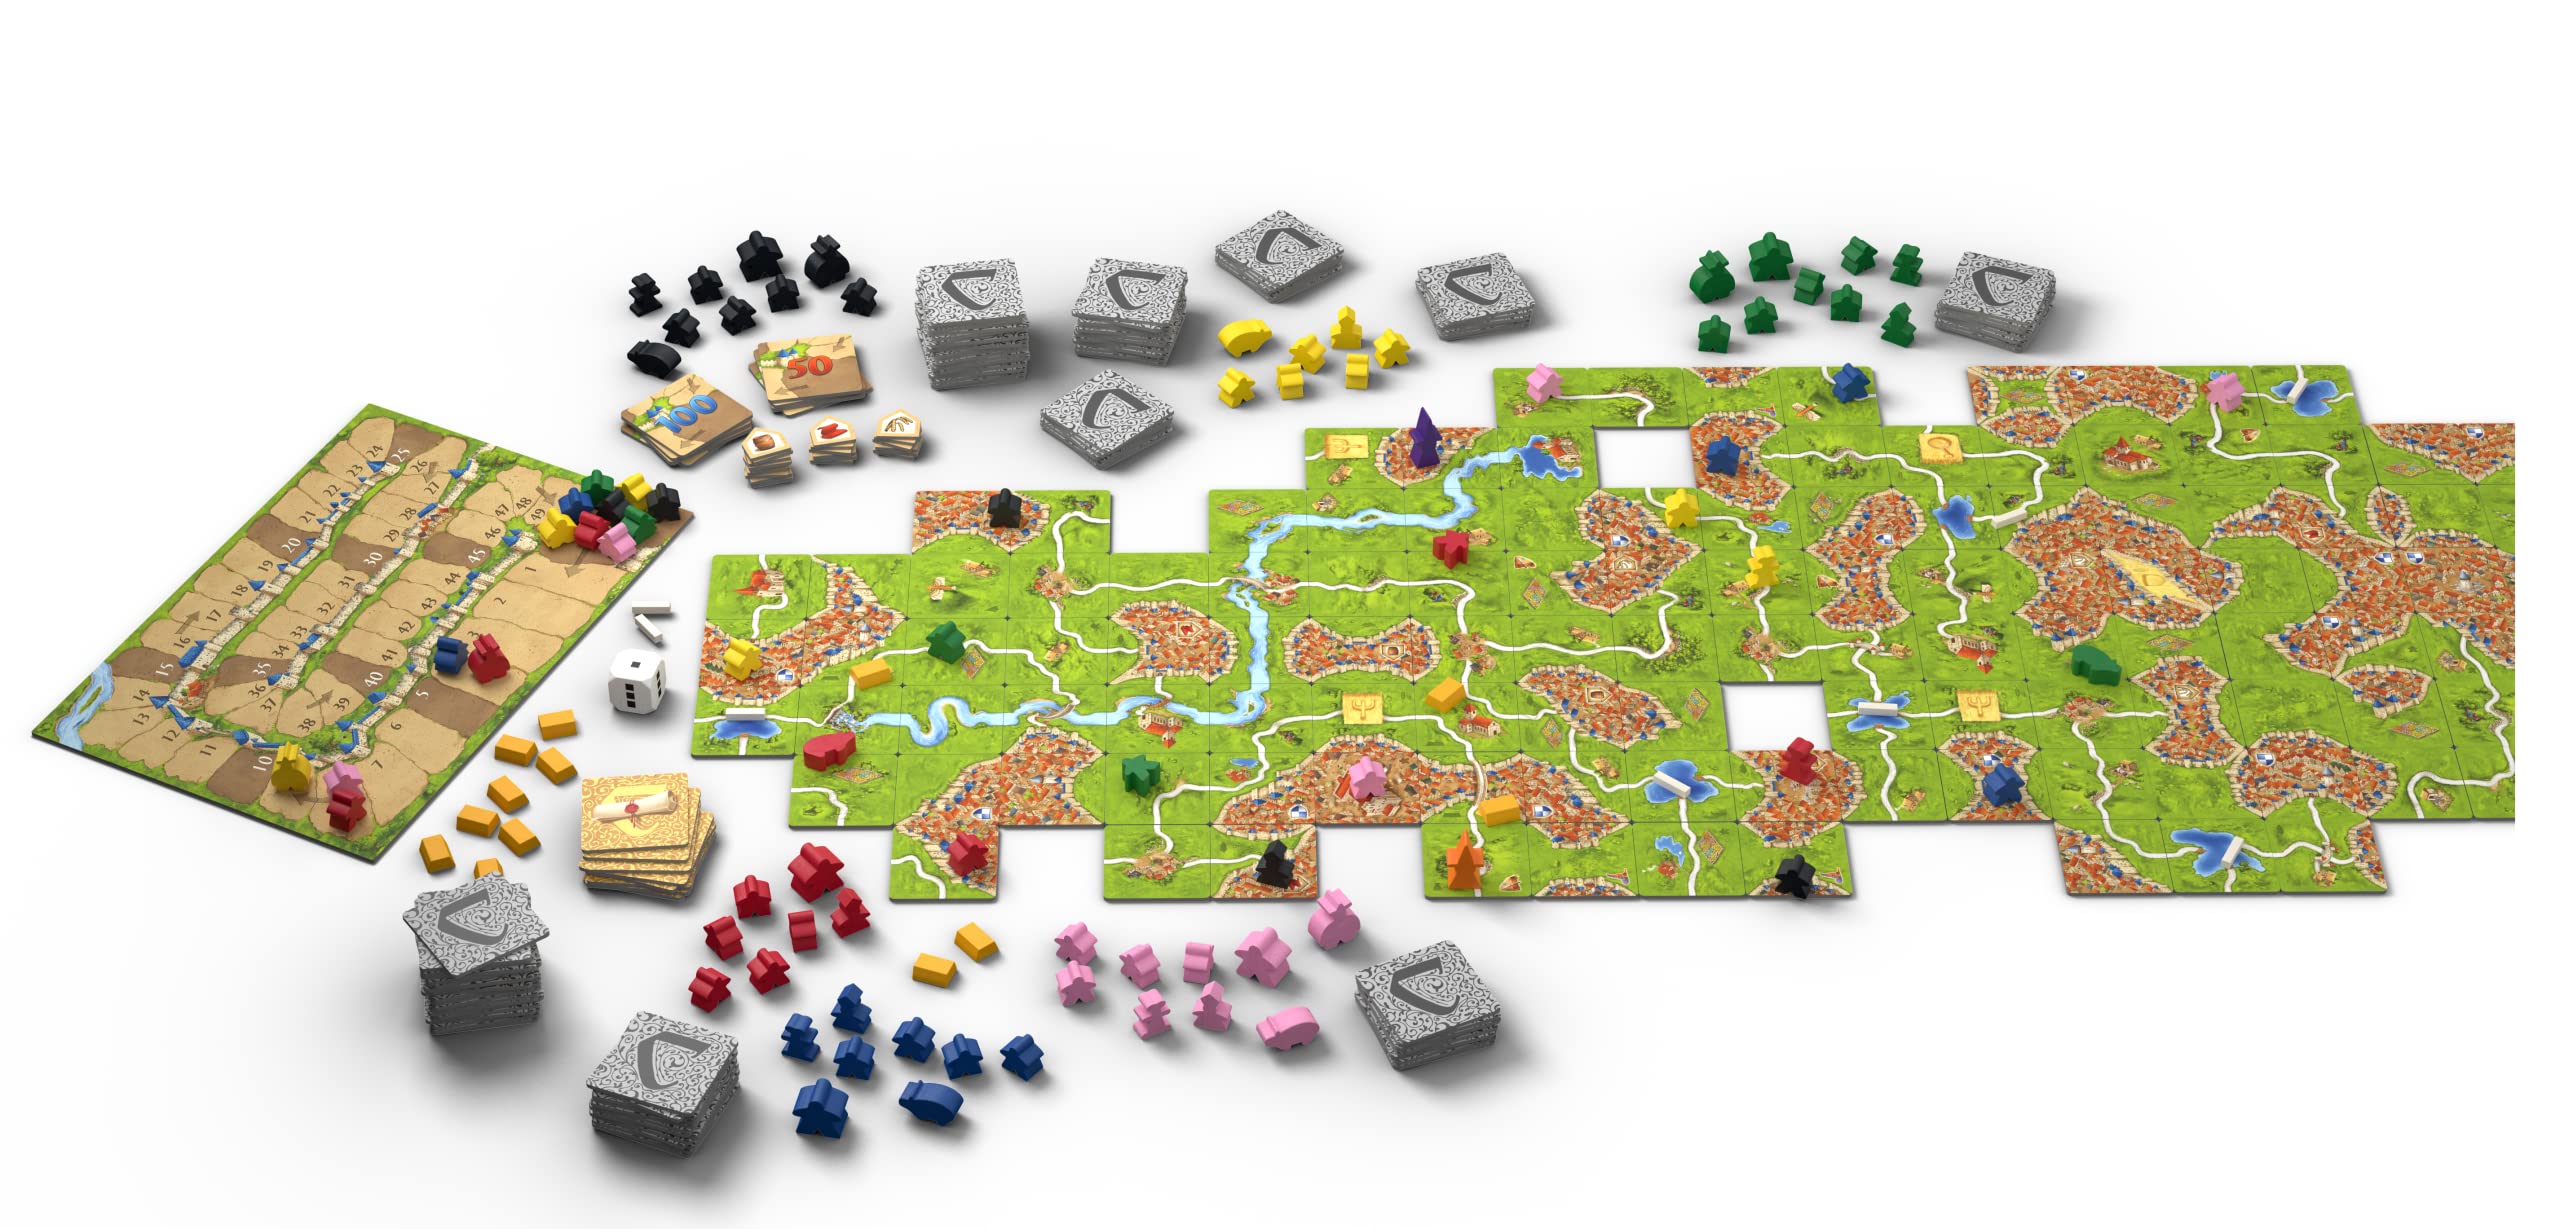 Z-Man Games Carcassonne Big Box Set (2022 Edition)| Medieval Strategy Board Game | Includes Base Game and 11 EXPANSIONS | Family Game for Kids and Adults | Ages 7+ | 2-6 Players | Made